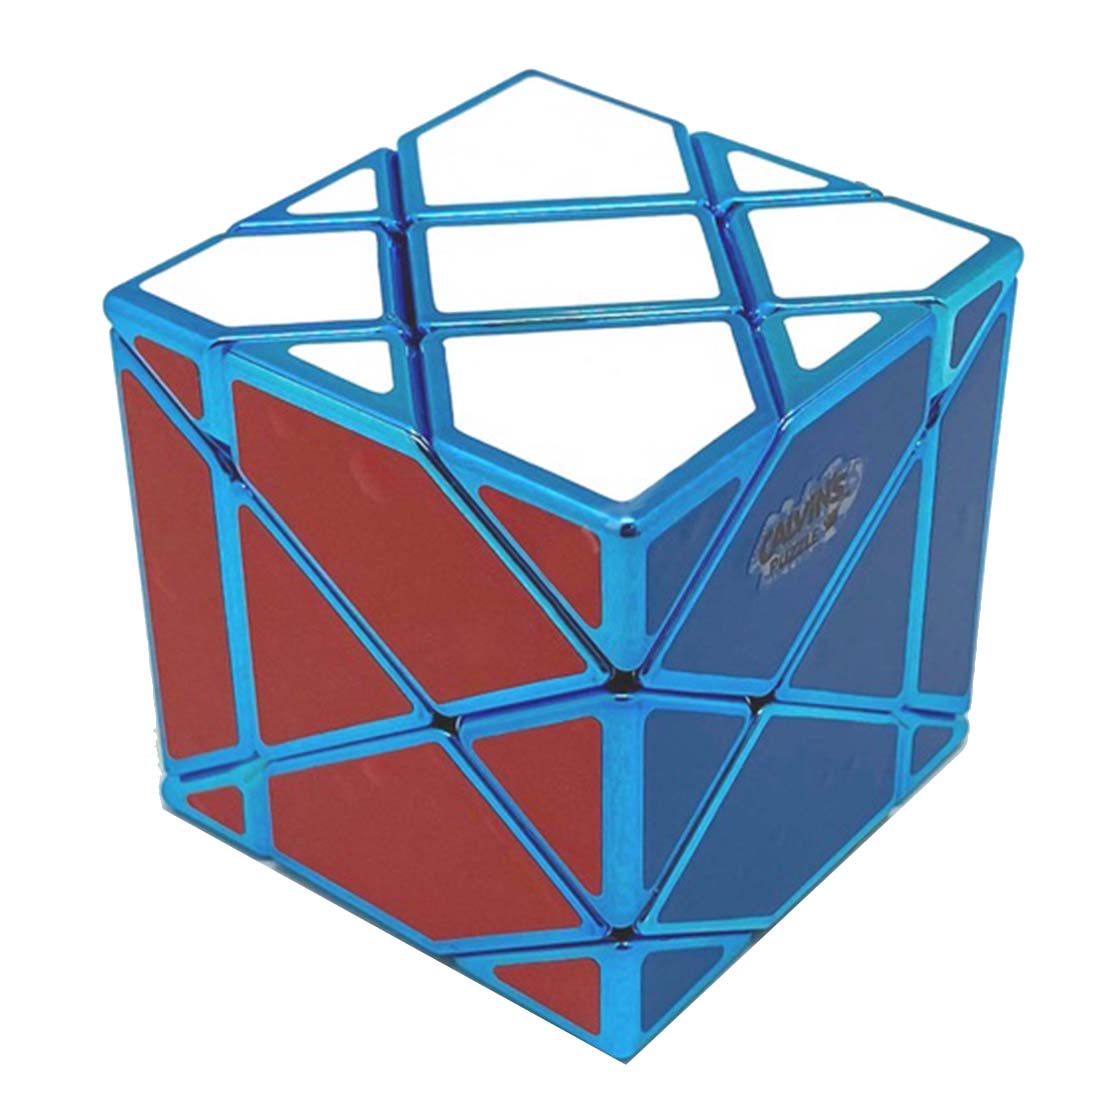 Calvin's Super Fisher 3x3 Speed Cube with 6-Color Stickers (Blue/Limited Edition)